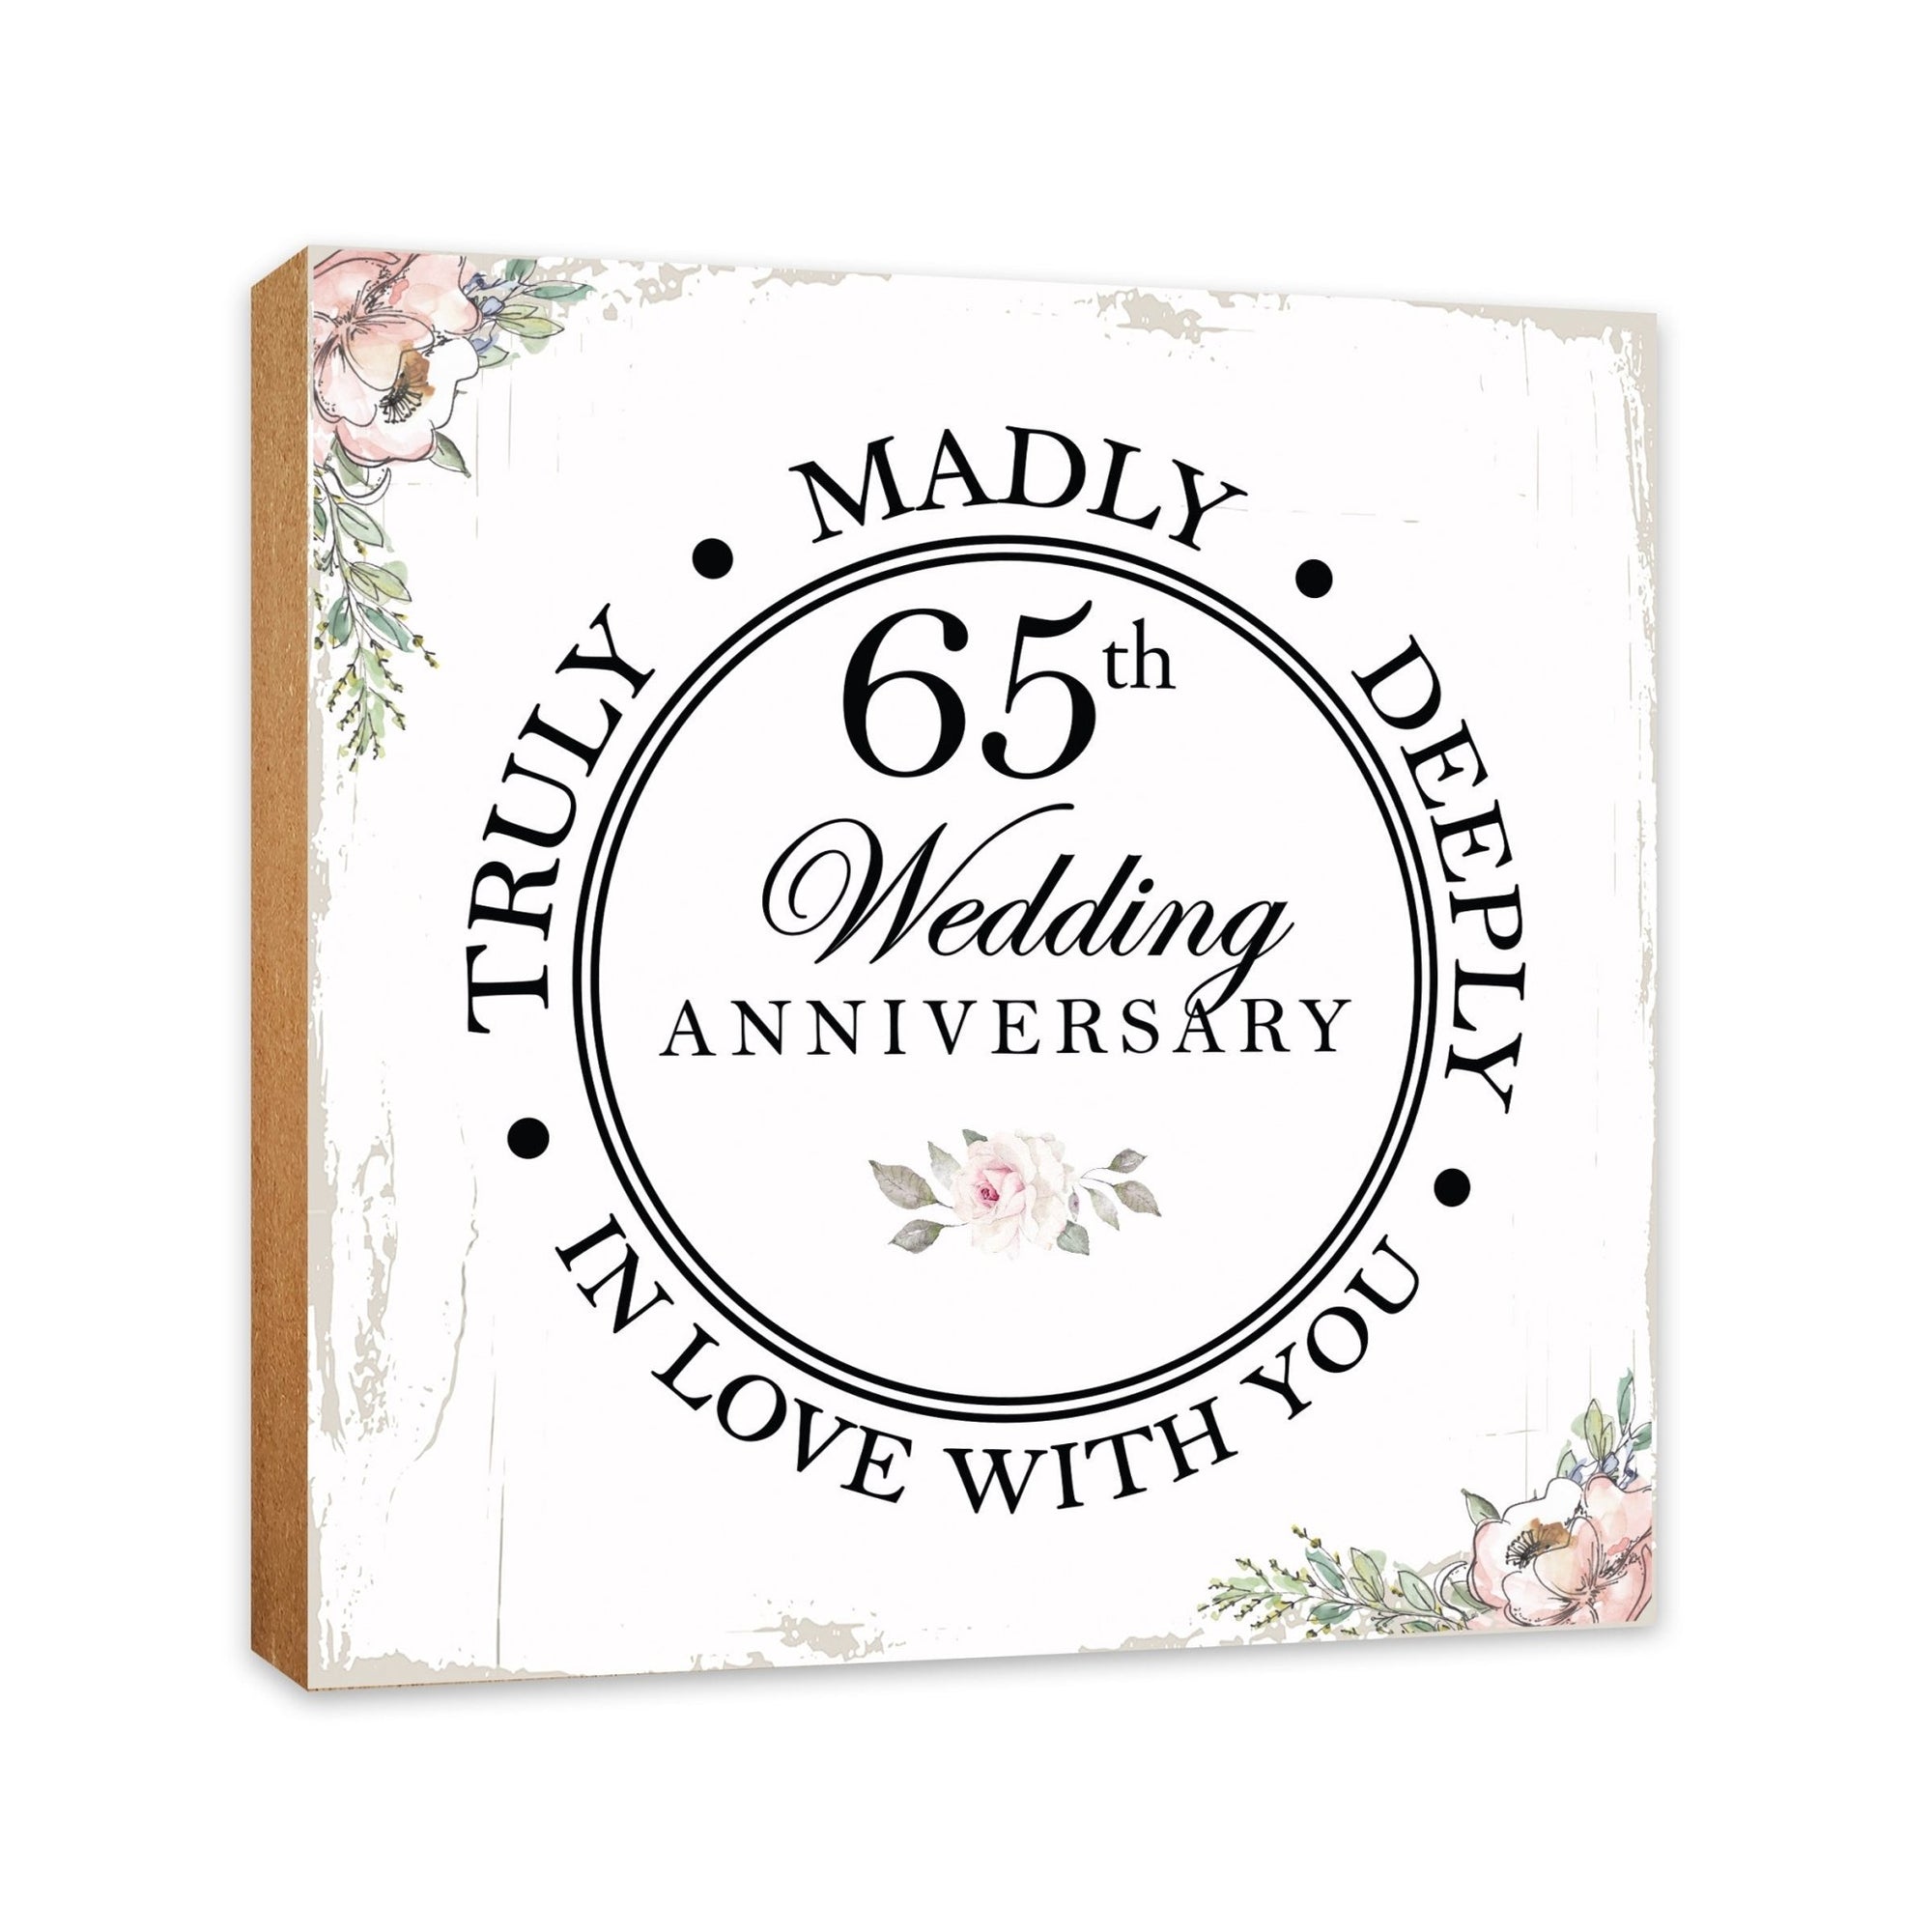 65th Wedding Anniversary Unique Shelf Decor and Tabletop Signs Gift for Couples - In Love With You - LifeSong Milestones